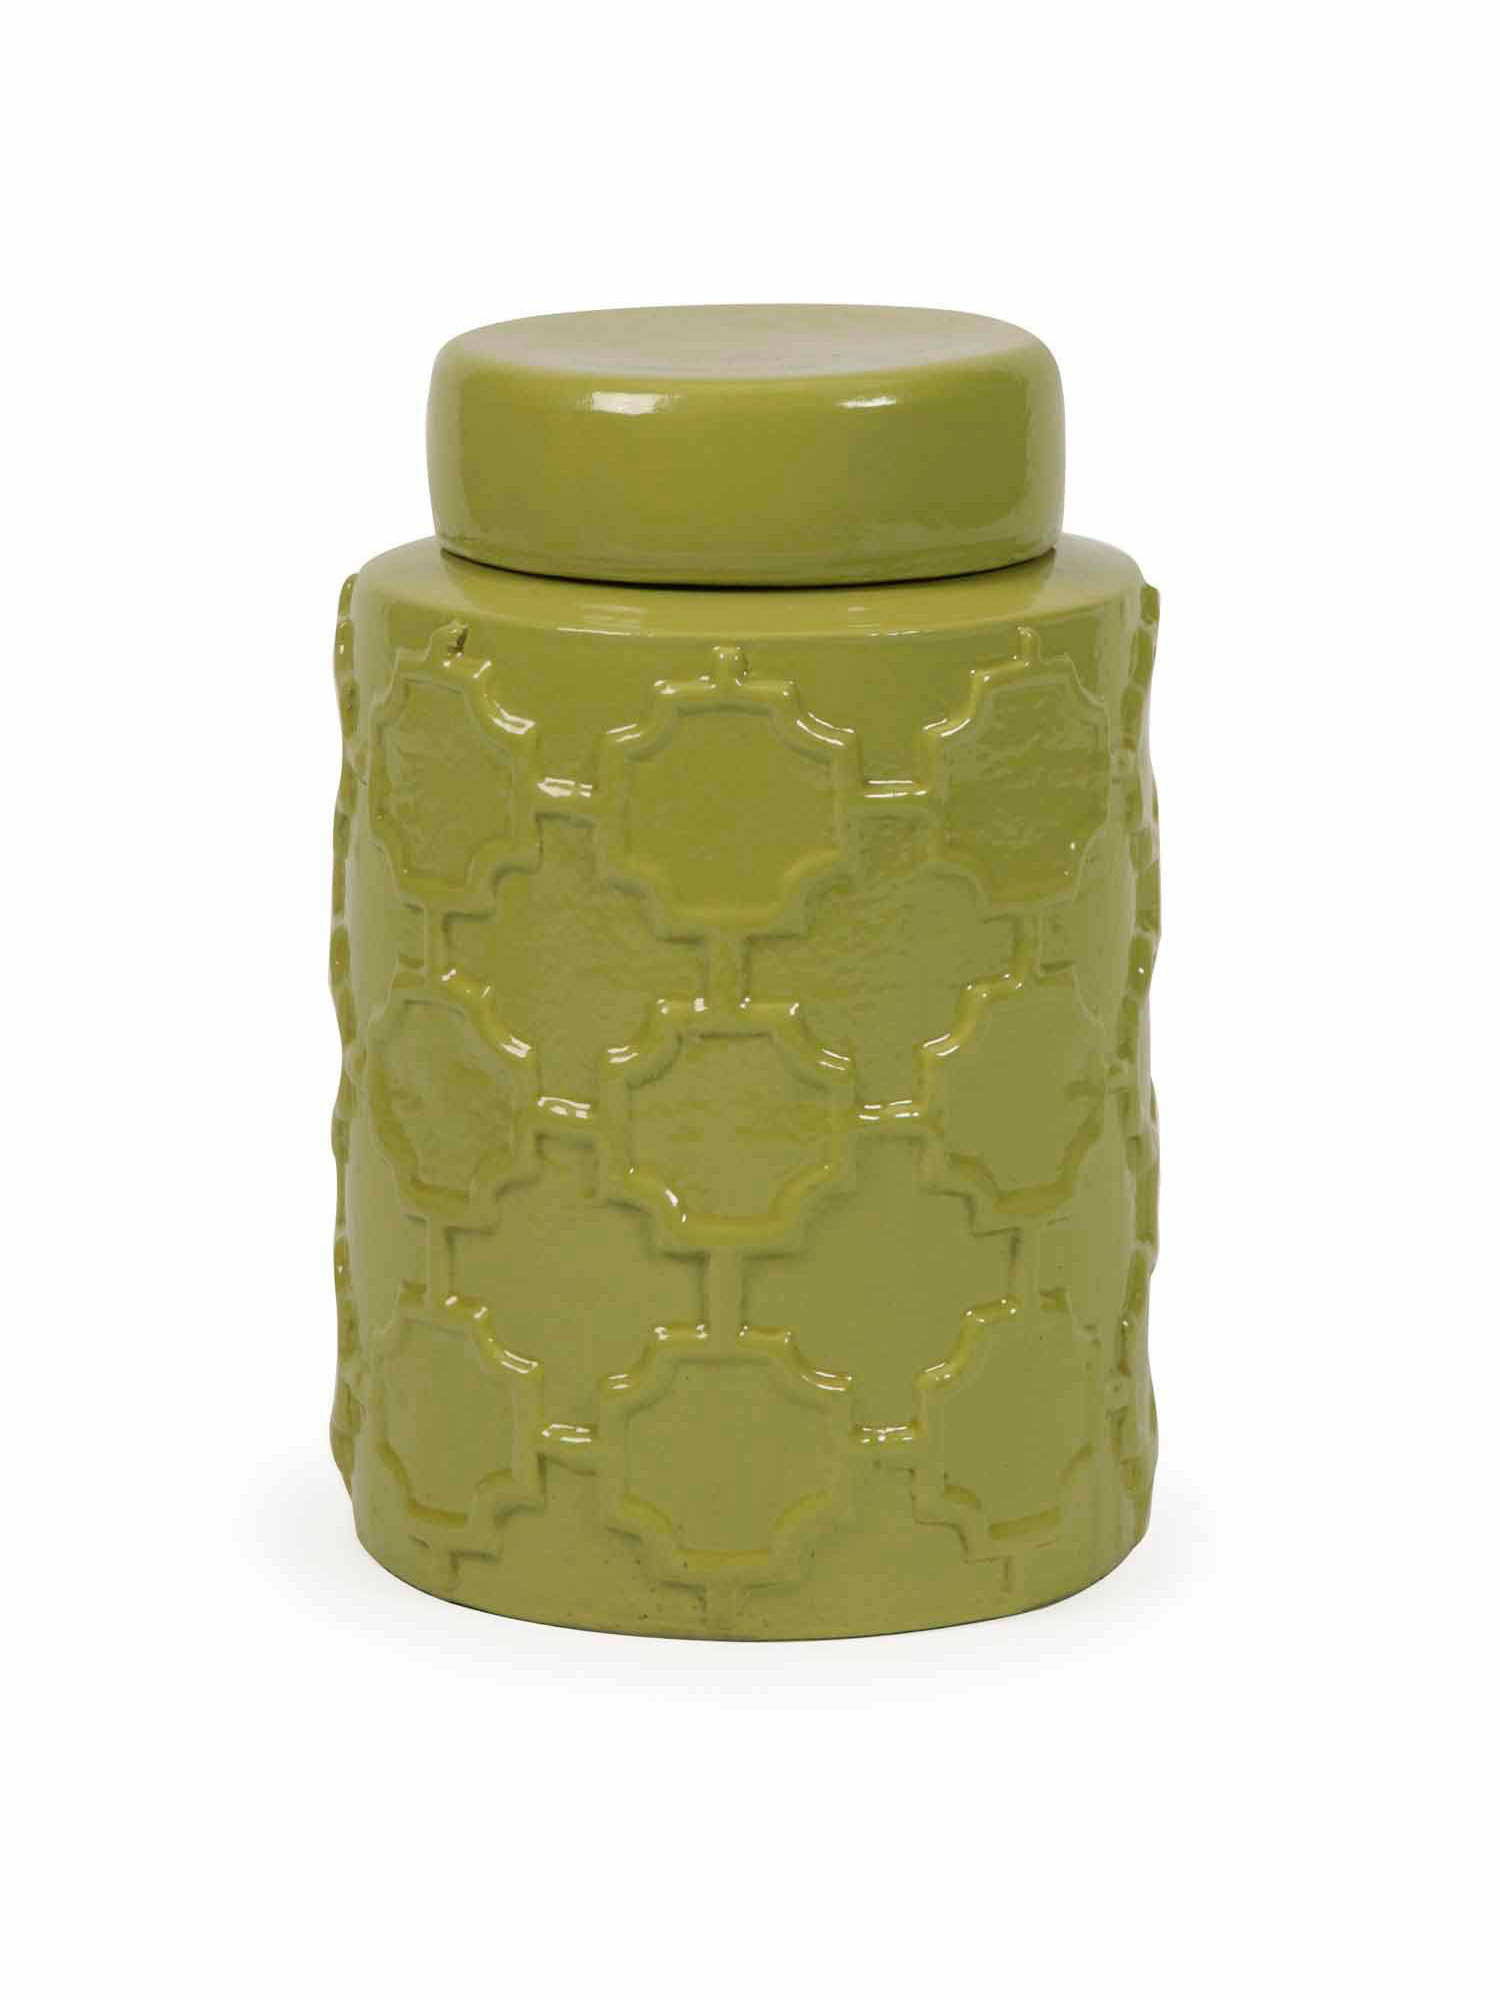 IMAX Essentials Green Apple Small Canister